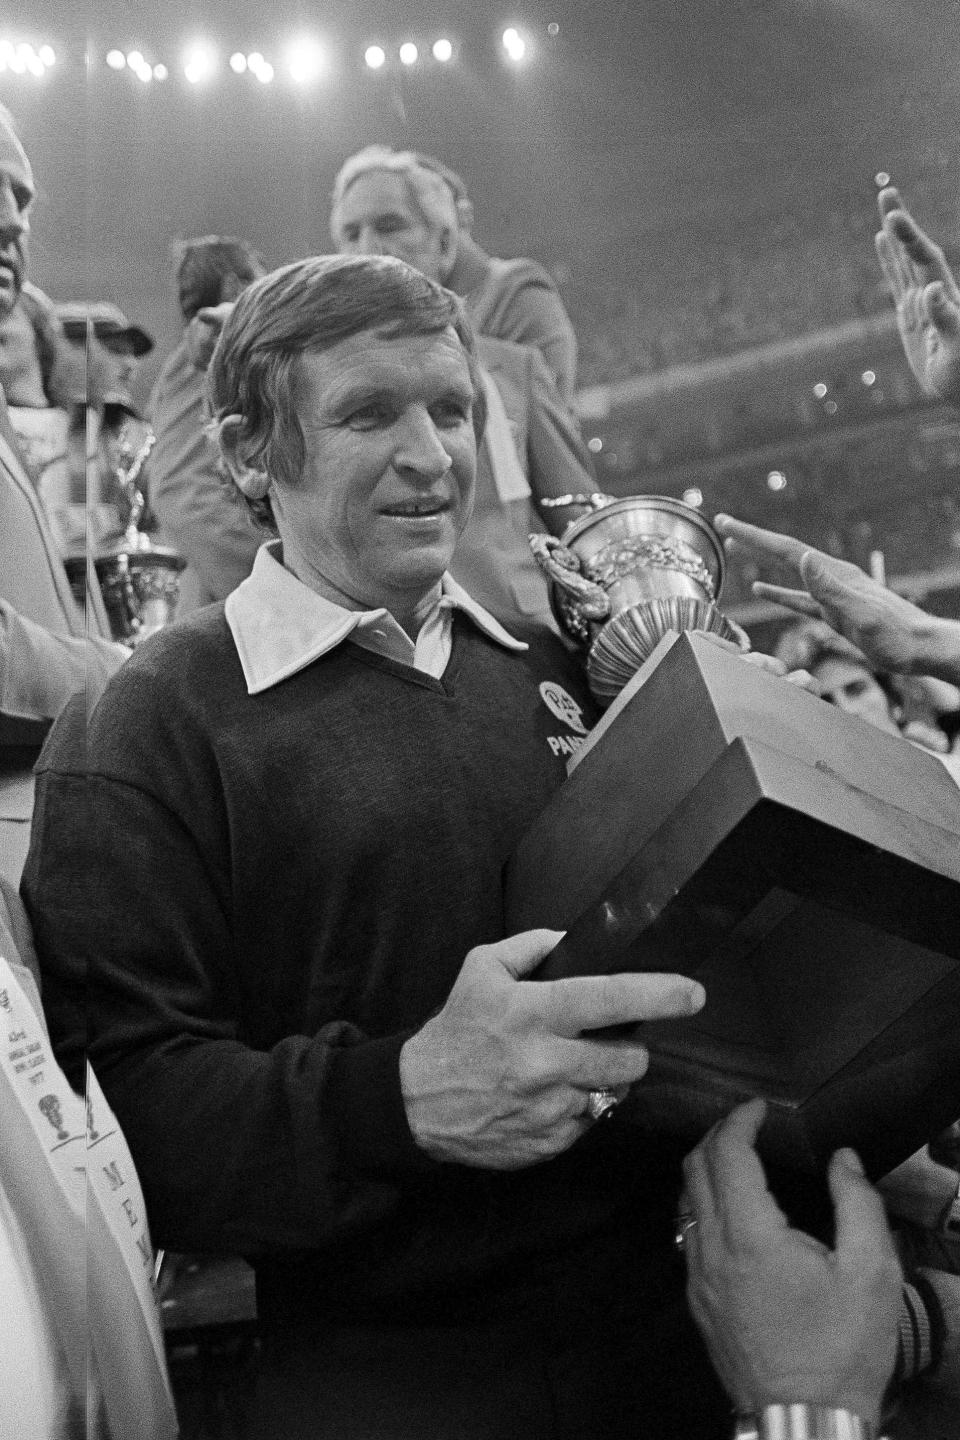 FILE - In this Jan. 3, 1977, file photo, University of Pittsburgh coach Johnny Majors carries the Sugar Bowl trophy after Pittsburgh beat Georgia 27-3 to win the NCAA college football national championship, in New Orleans. Majors, the coach of Pittsburgh’s 1976 national championship team and a former coach and star player at Tennessee, has died. He was 85. Majors died Wednesday morning, June 3, 2020, at home in Knoxville, Tenn., according to a statement from his wife, Mary Lynn Majors. (AP Photo/File)